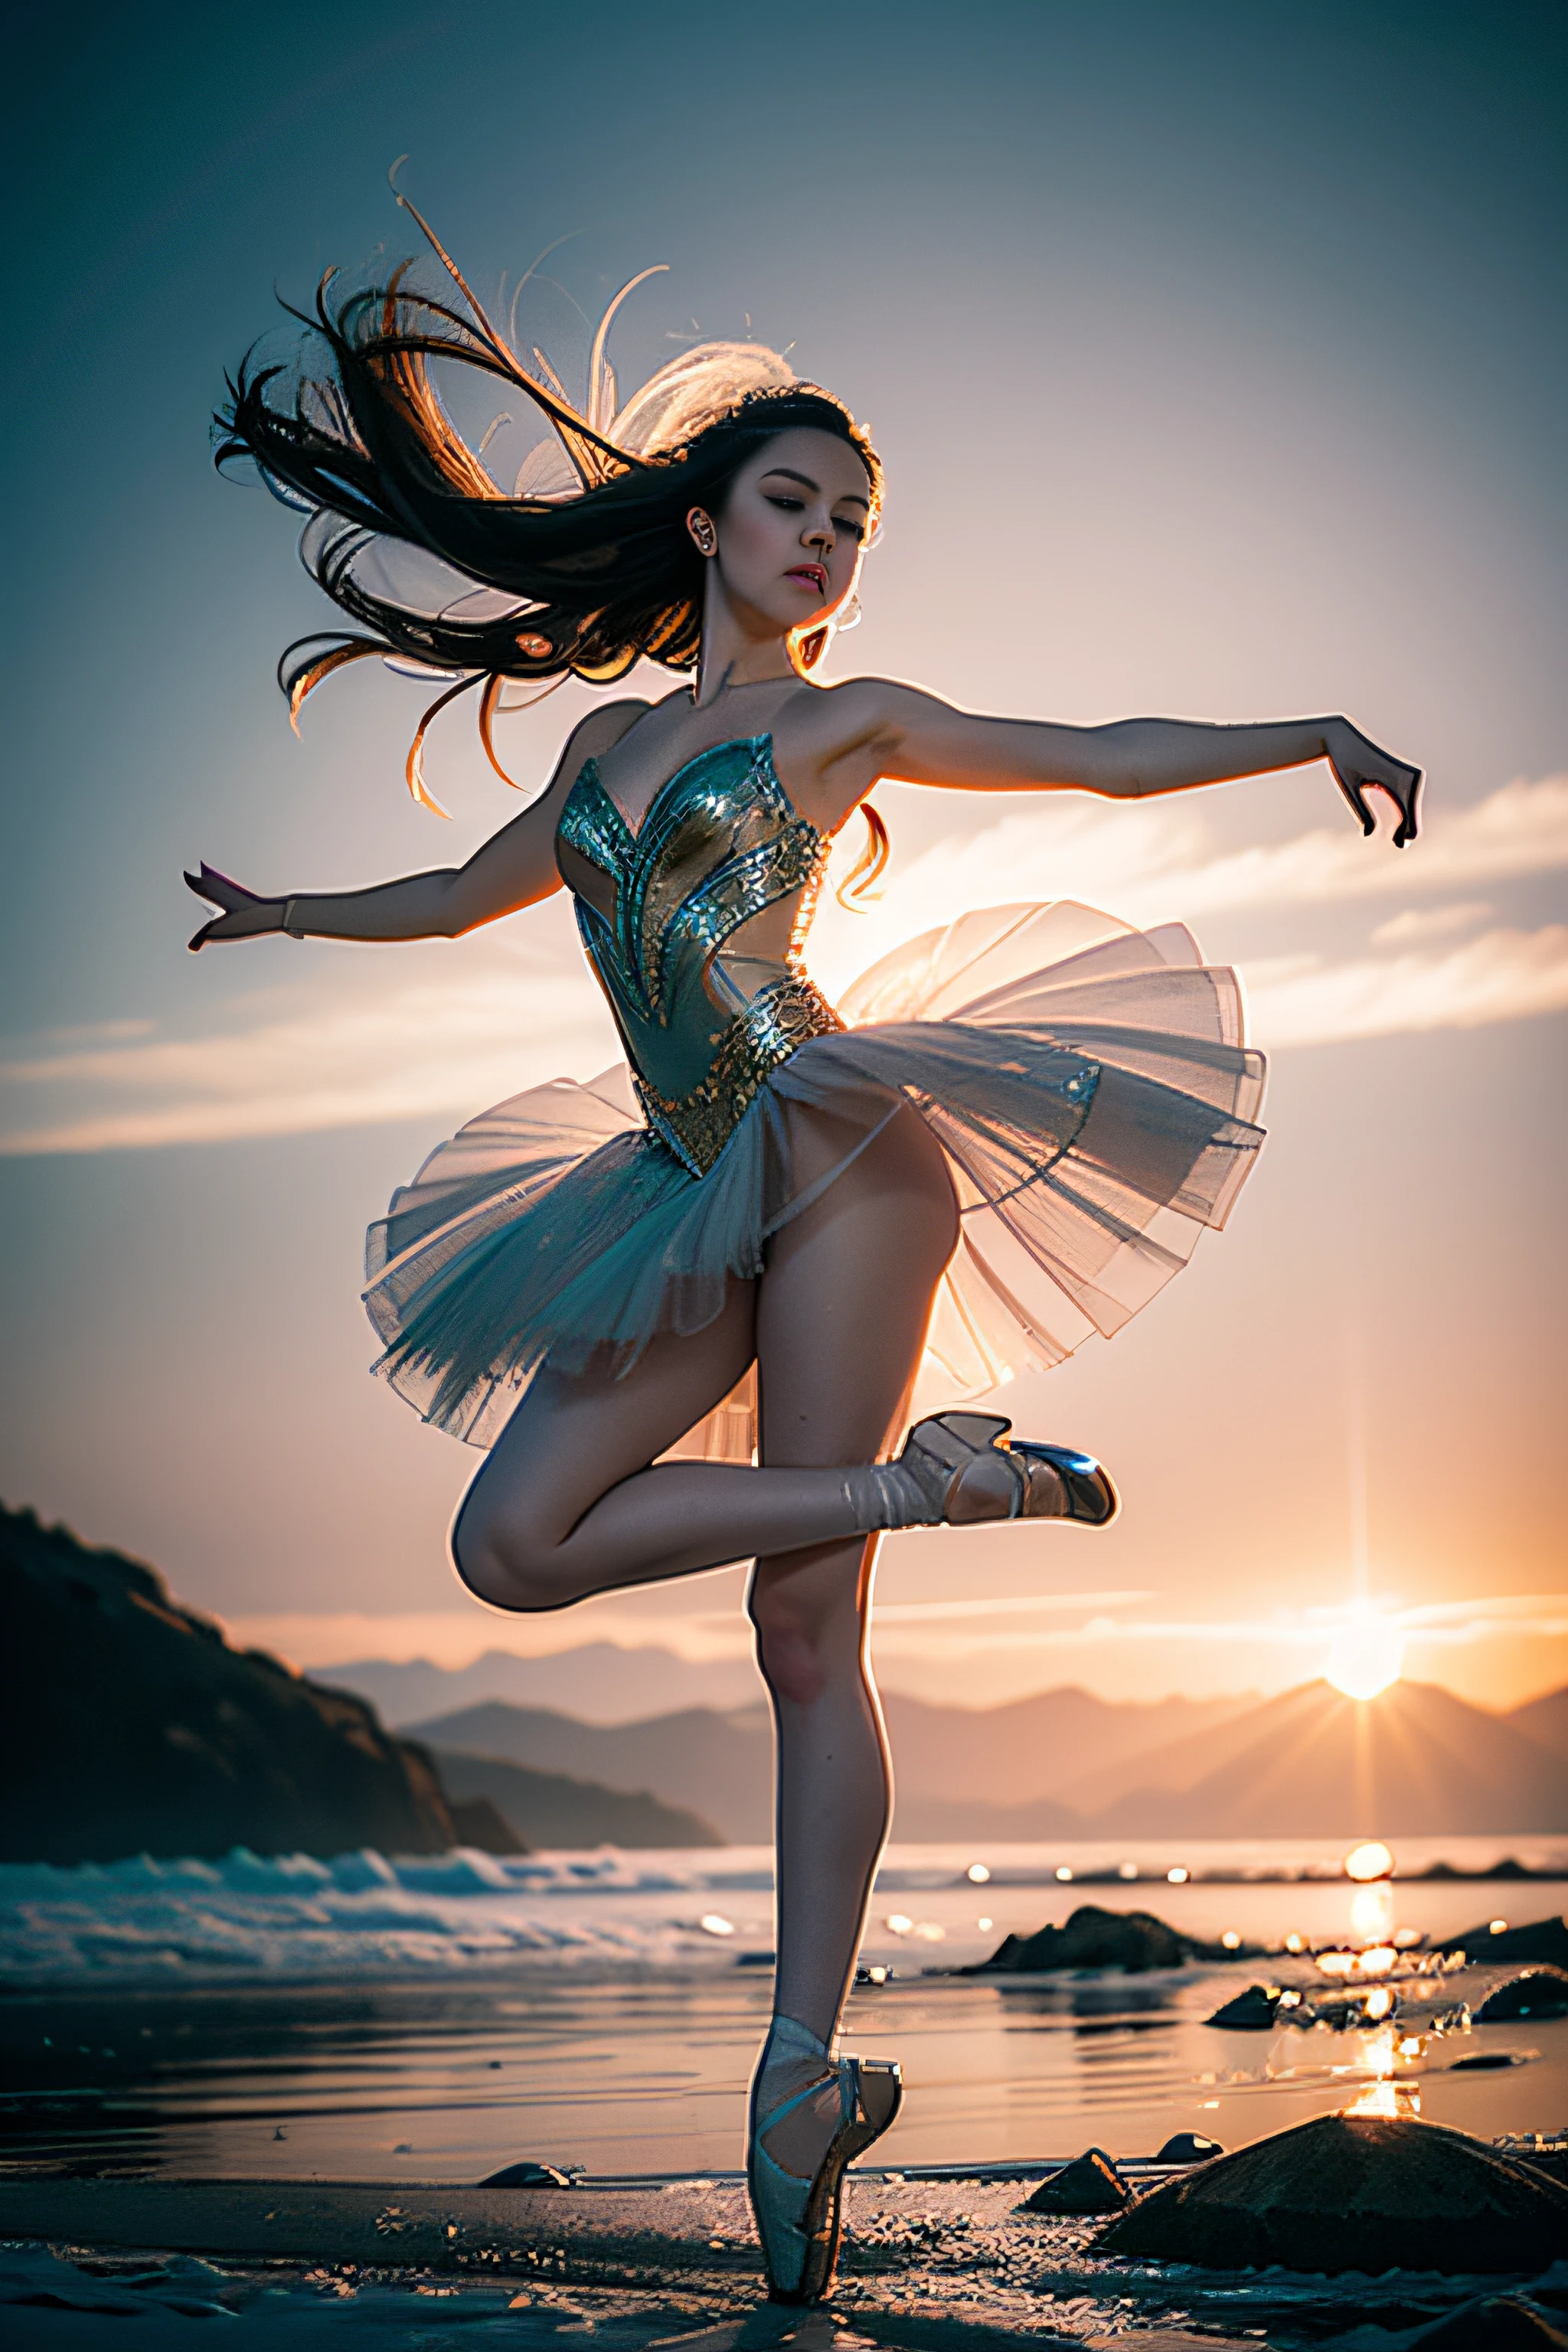 A dynamic portrait captures a ballet dancer mid-leap, frozen in a breathtaking moment of grace and elegance. The subject's graceful pose and flowing costume are highlighted by dynamic lighting and particle effects. The photography style resembles an ethereal watercolor painting, emphasizing fluidity and beauty. Camera parameters: Nikon Z6, f/1.4 aperture, ISO 320, shutter speed 1/500